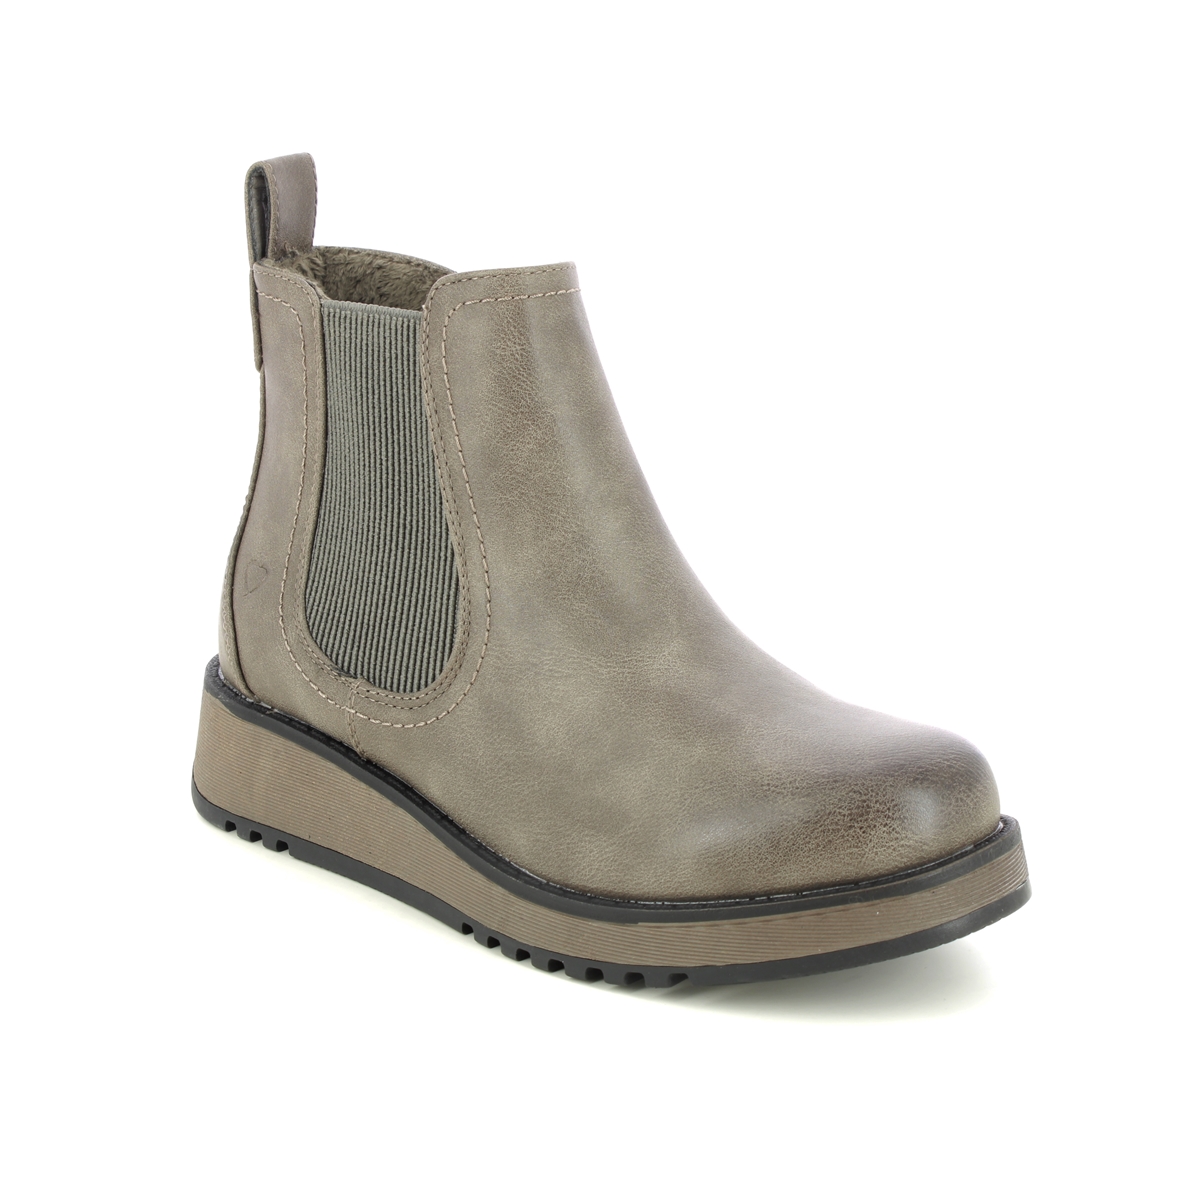 Heavenly Feet Rolo   2 New Dark Taupe Womens Chelsea Boots 3503-50 In Size 3 In Plain Dark Taupe